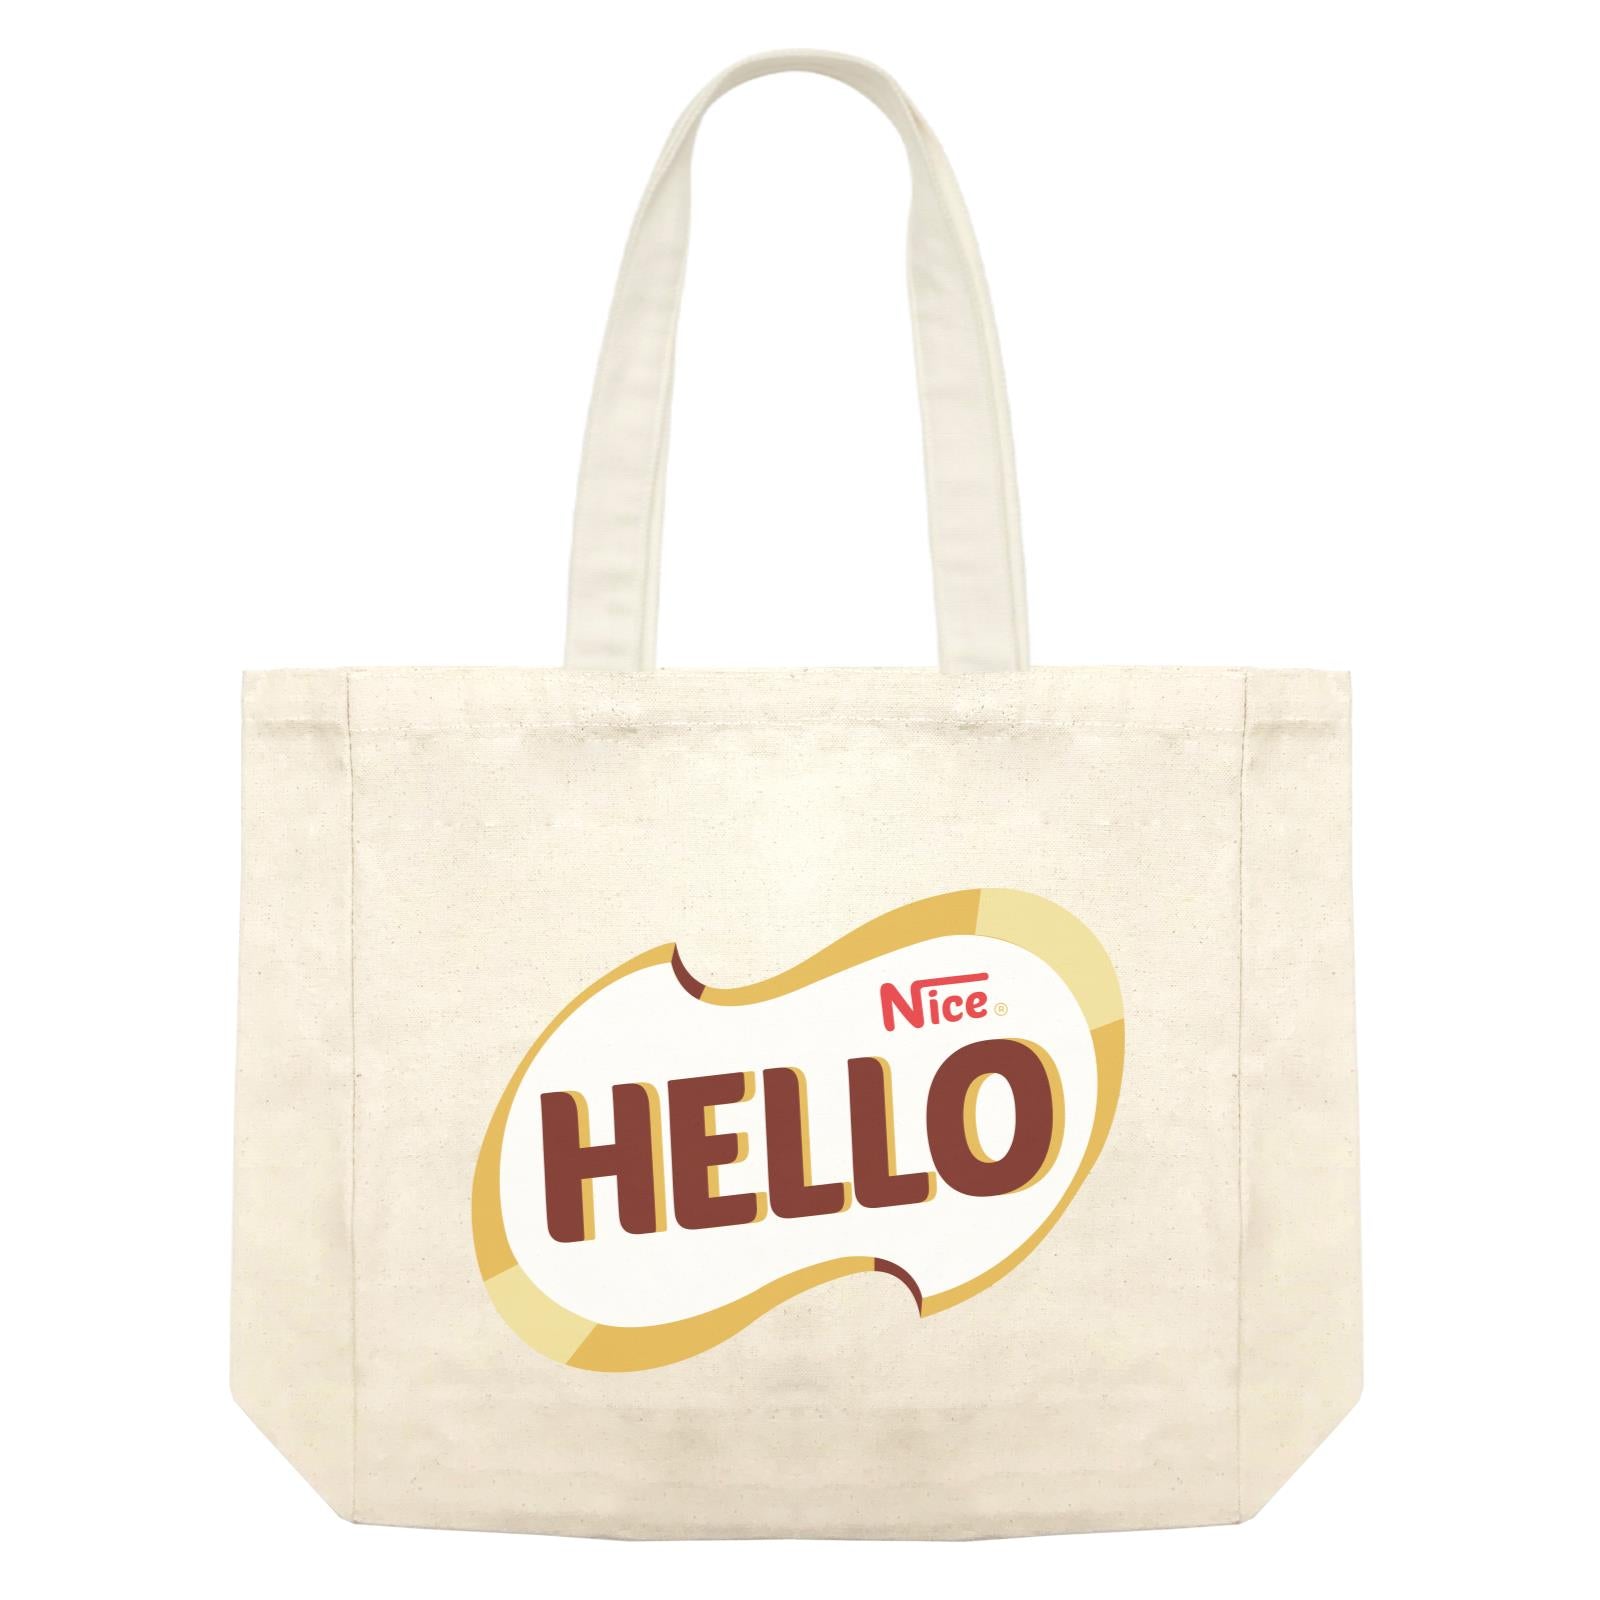 Slang Statement Hello Nice Accessories Shopping Bag